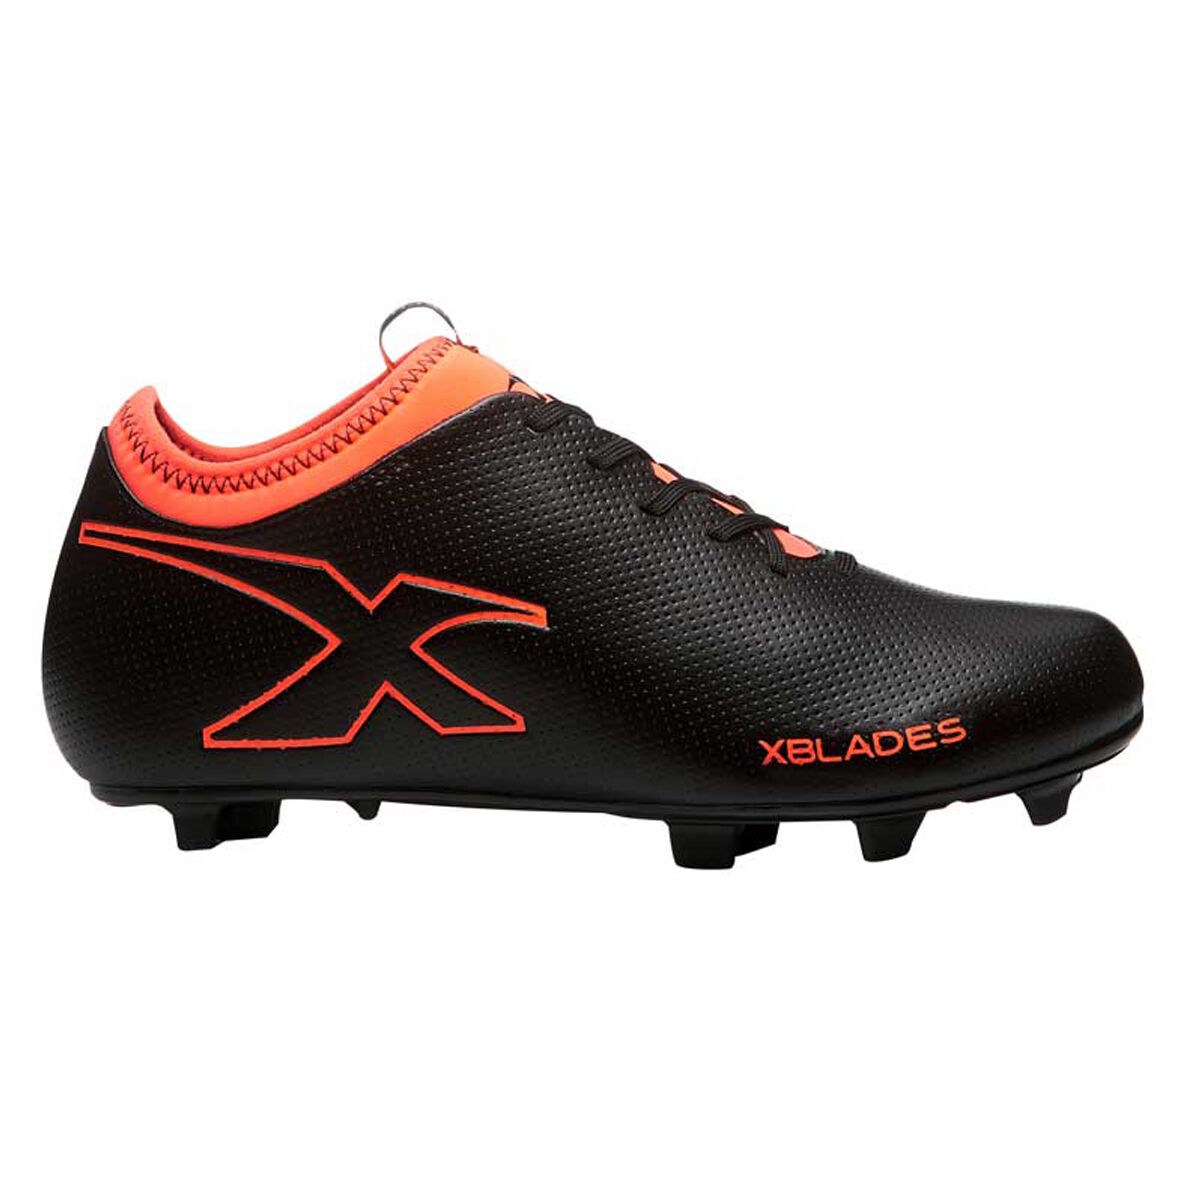 rugby boots blades